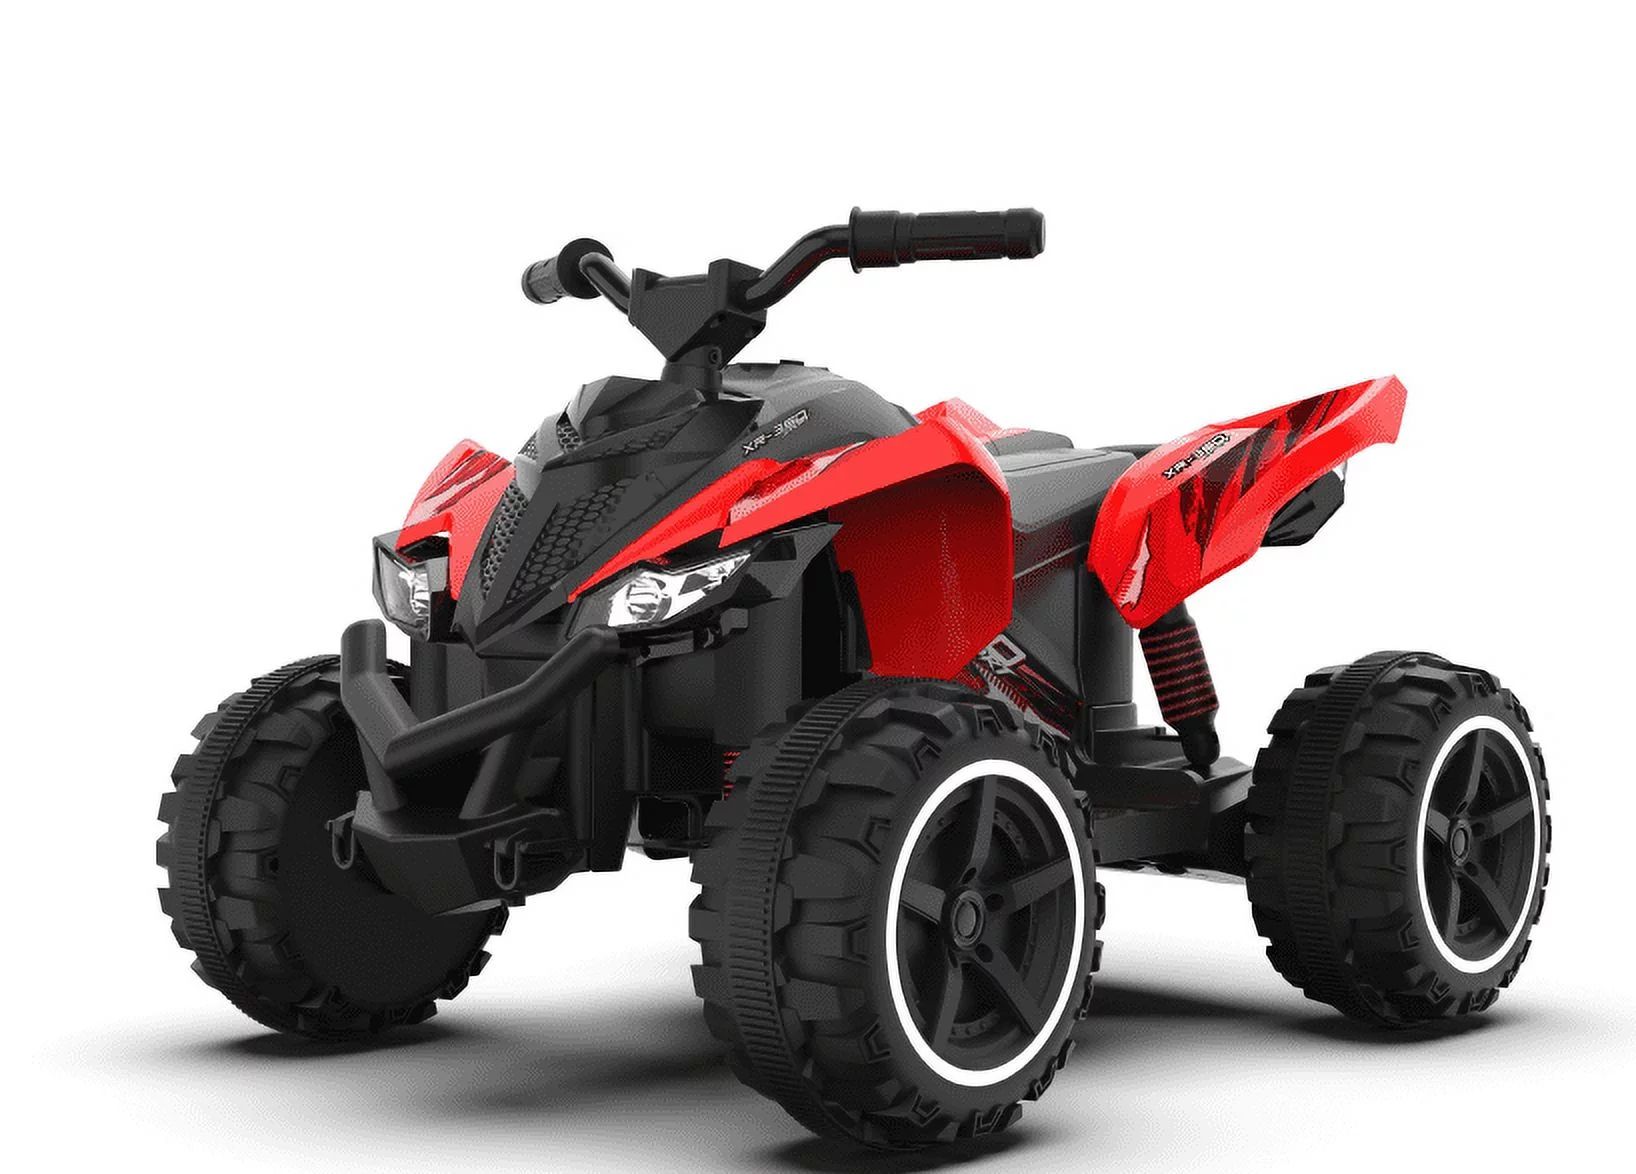 12V XR-350 ATV Powered Ride-on by Action Wheels, Red, for Children, Unisex, Ages 2-4 Years Old | Walmart (US)